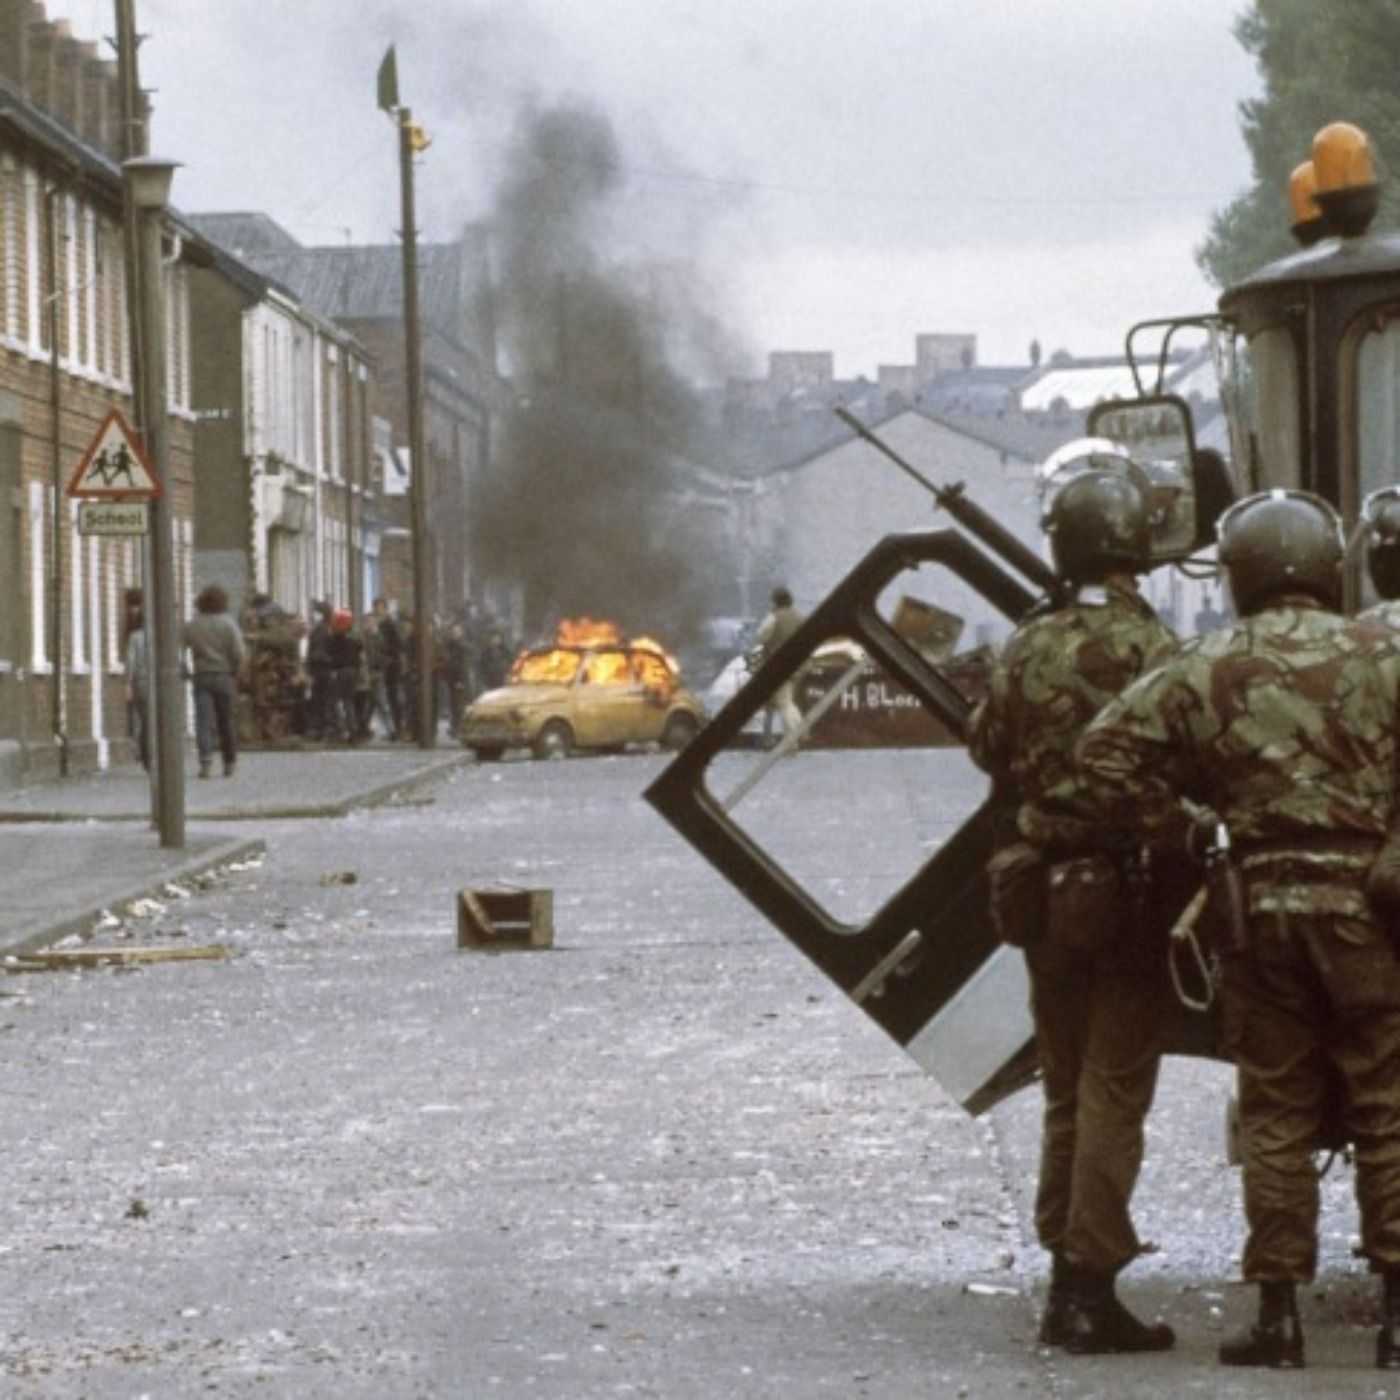 How Did The Troubles Begin And Who Was Involved?